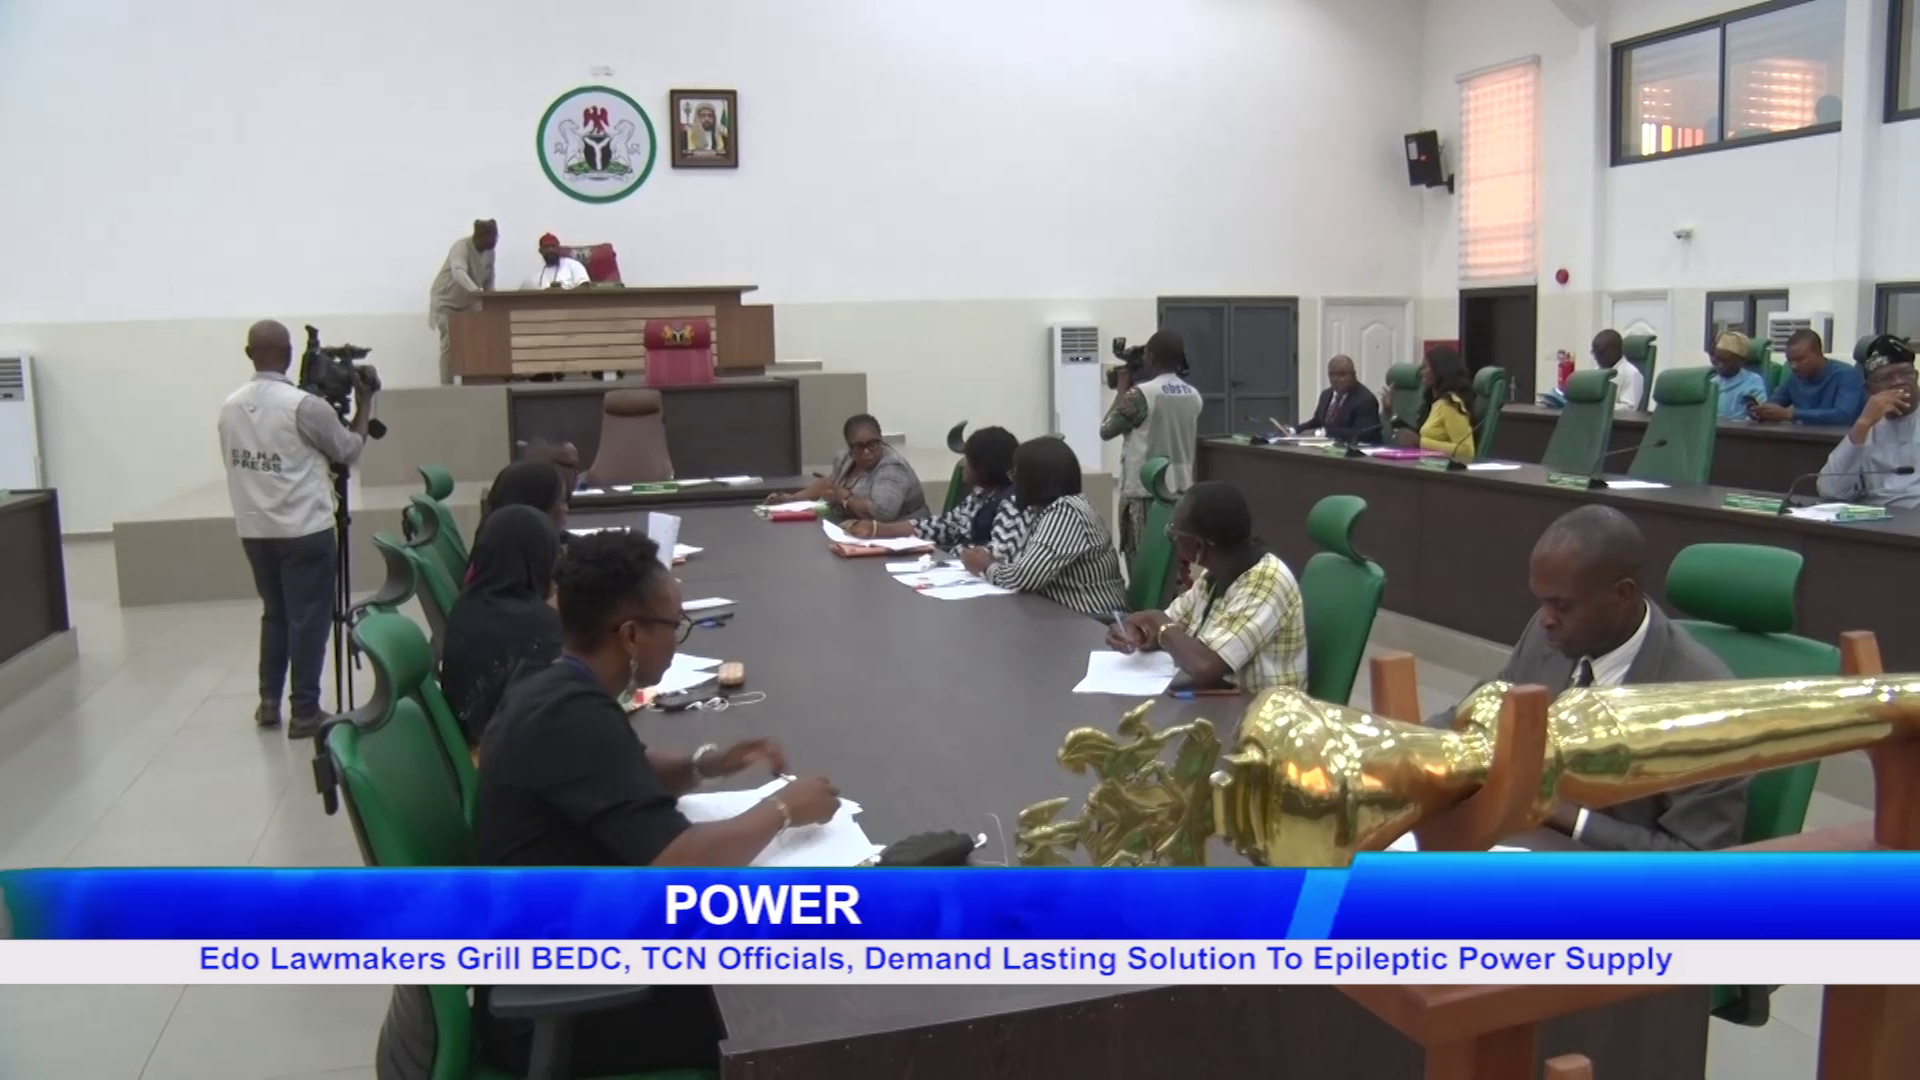 Edo Lawmakers Grill BEDC, TCN Officials, Demand Lasting Solution To Epileptic Power Supply